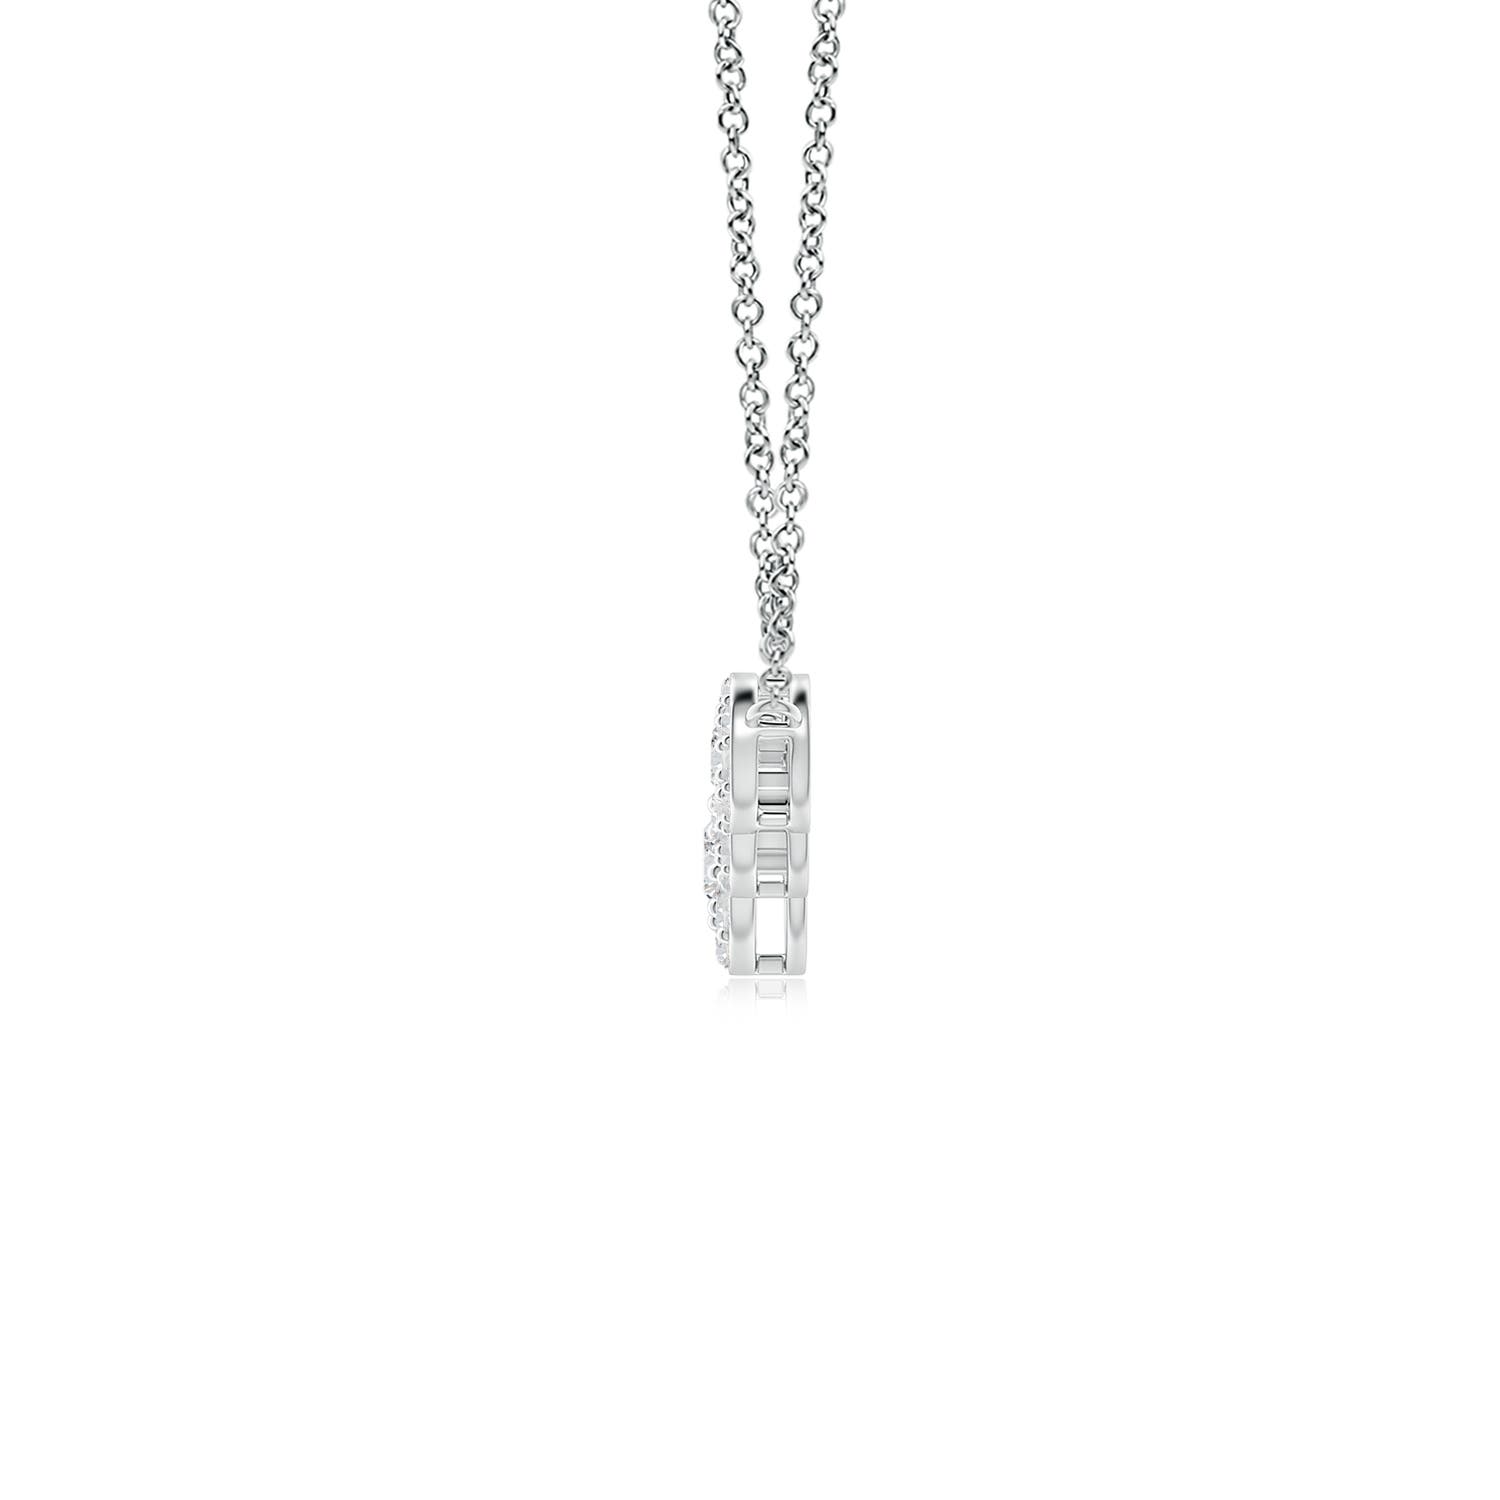 H, SI2 / 1.48 CT / 14 KT White Gold